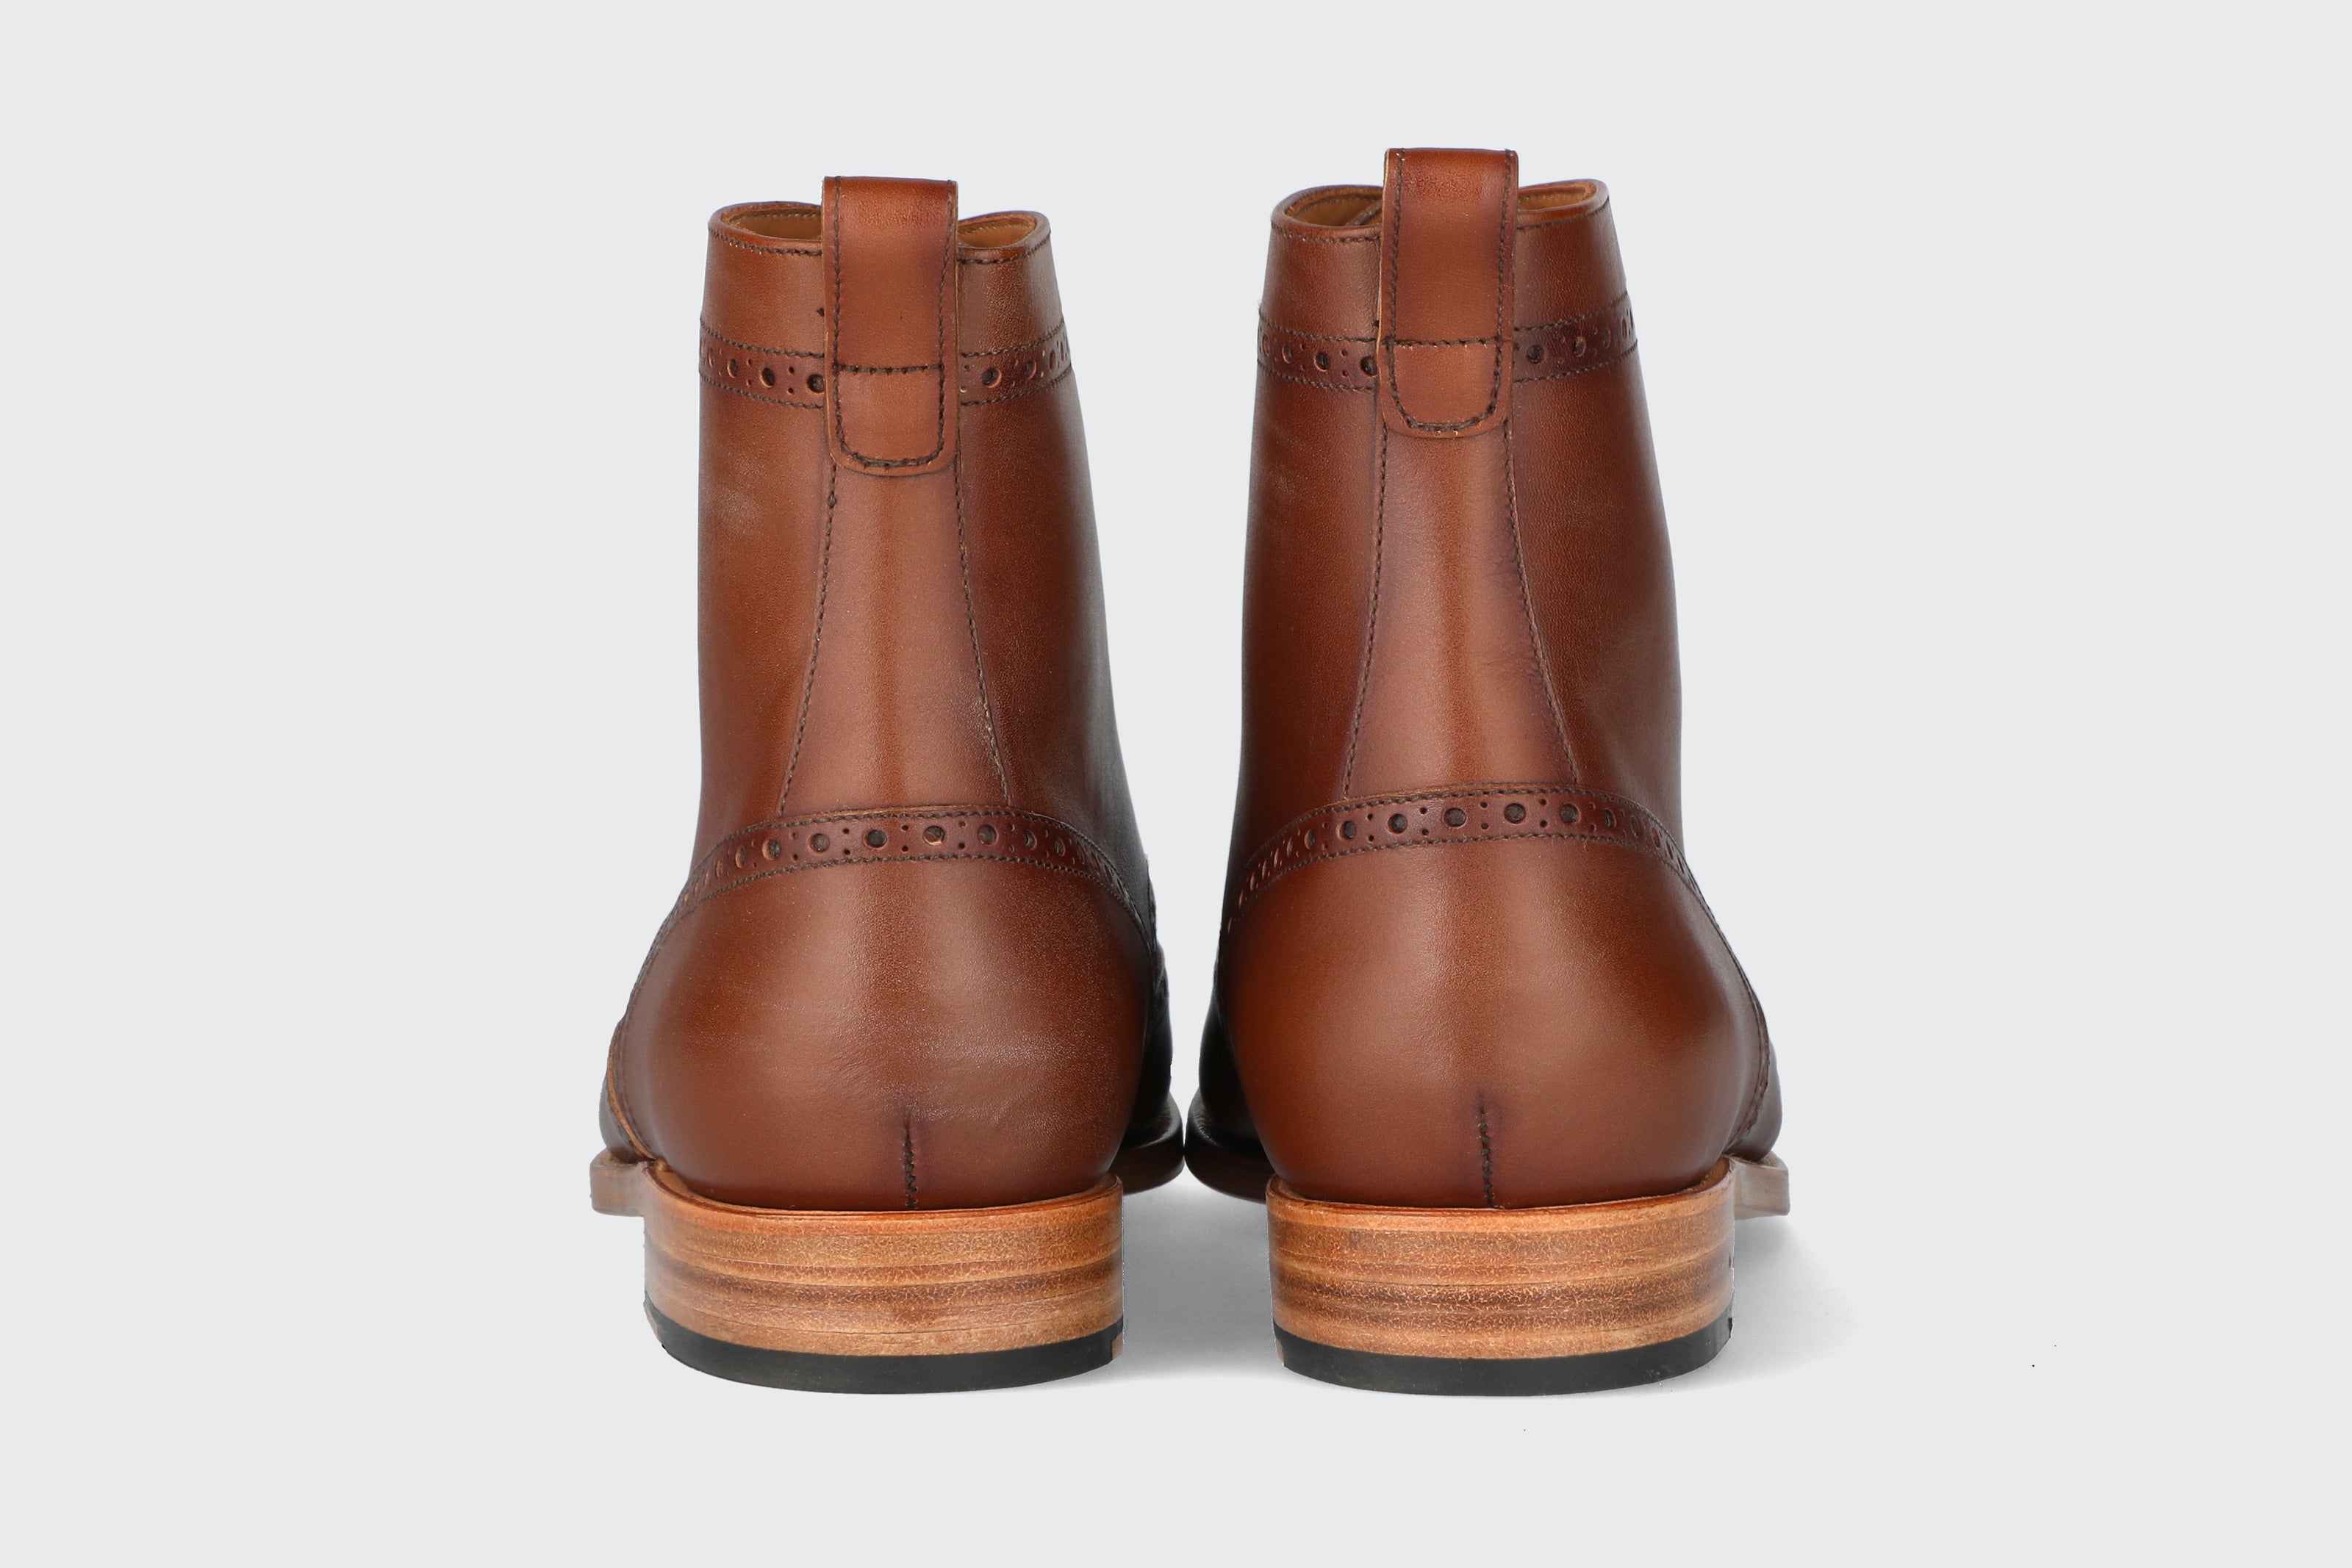 The heels of a pair of brown leather dress boots from the Hartt Shoe company